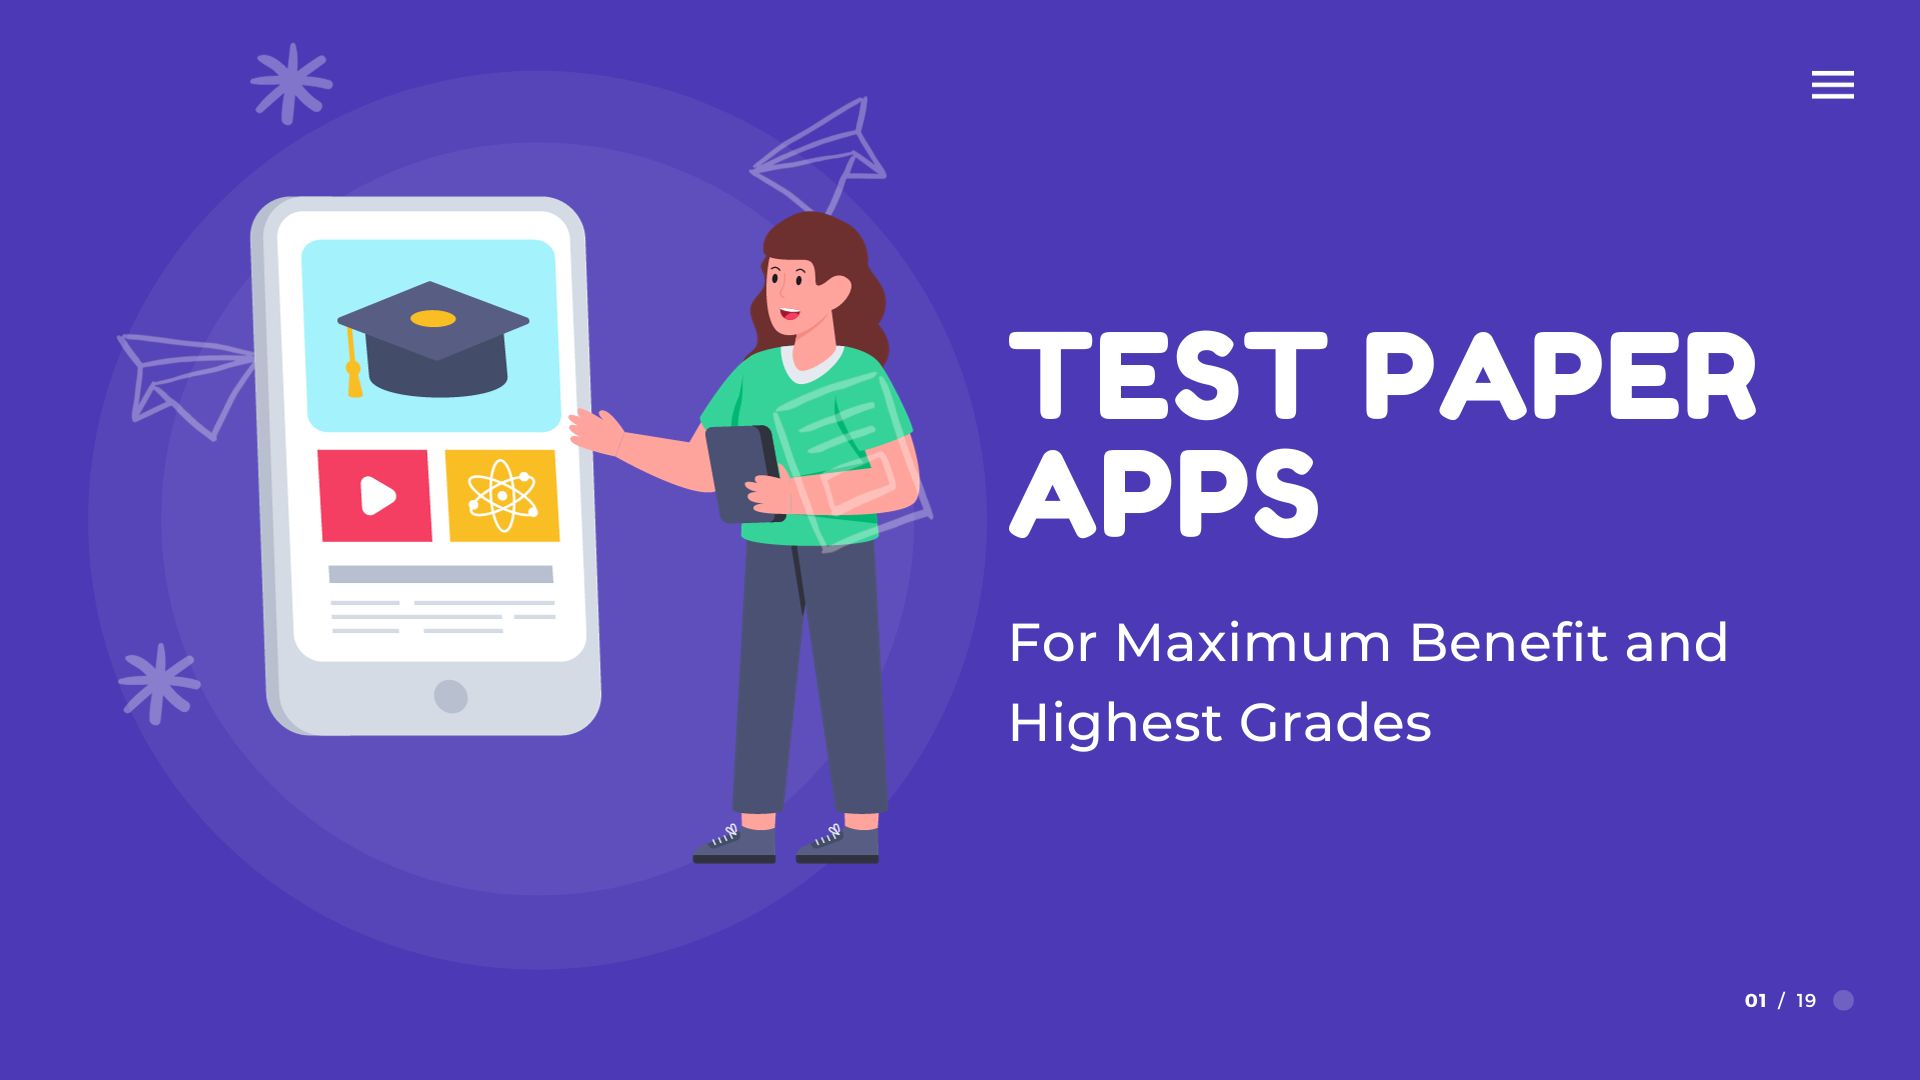 How to Use Test Prep Apps for Maximum Benefit and Highest Grades